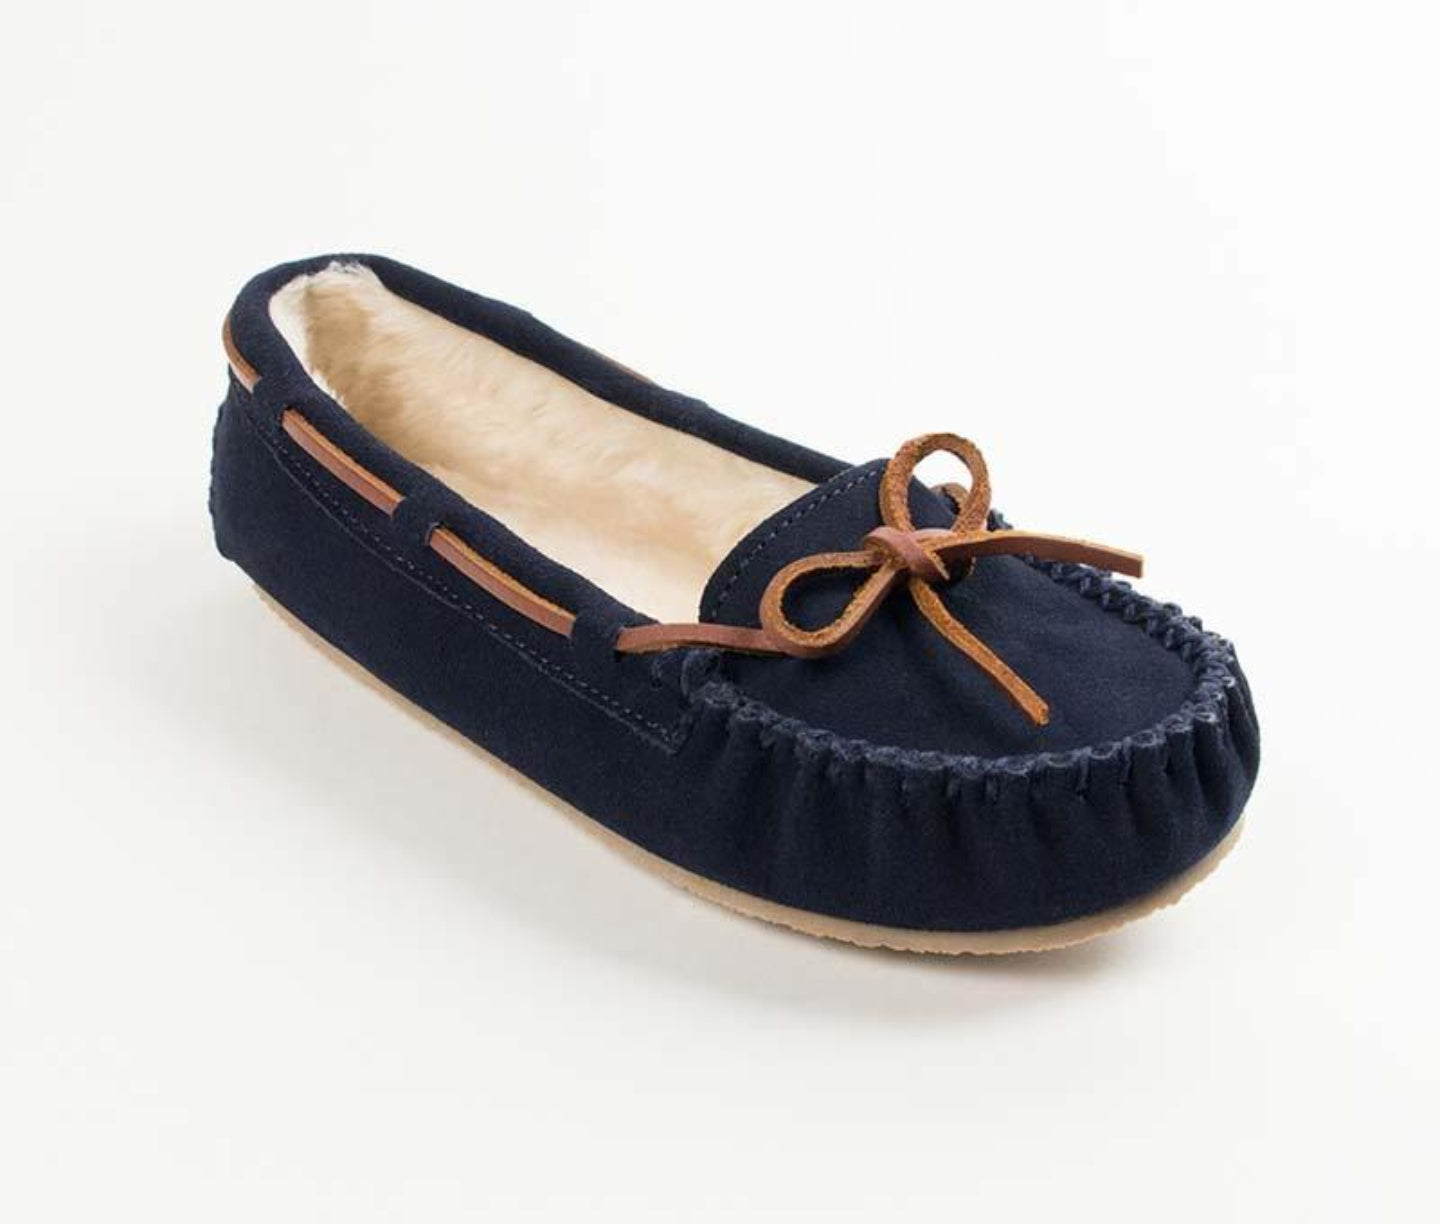 Cally Slipper in Dark Navy from 3/4 Angle View